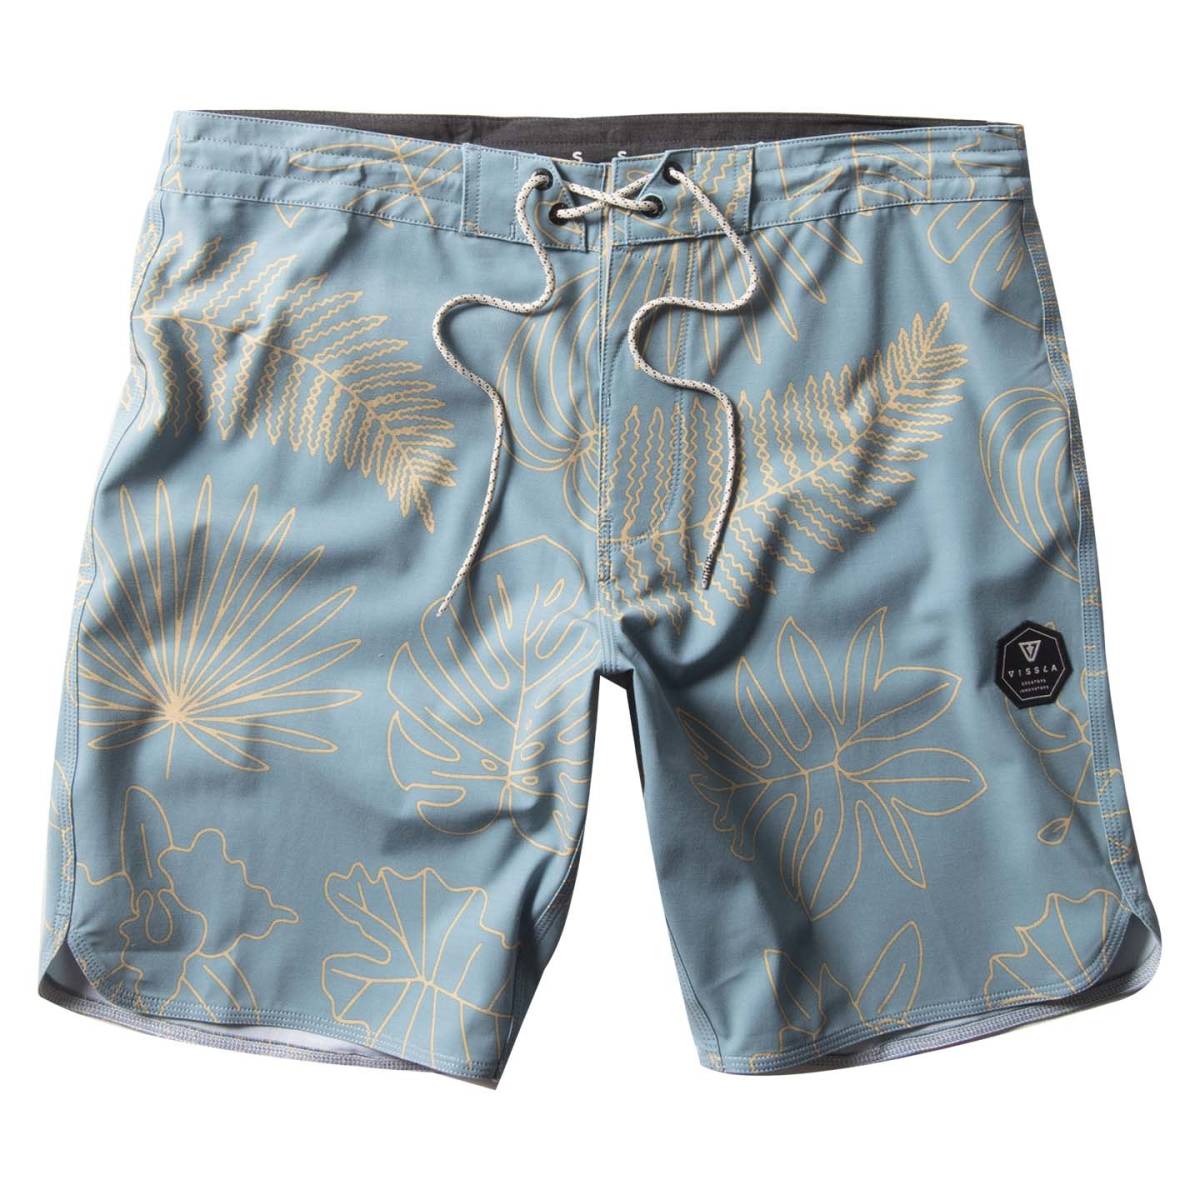 ☆Sale/新品/正規品 VISSLA ”TROPICAL PLEASURES 18.5” BOARD SHORTS | Color：STM | Size：28int/72cm | ヴィスラ | ボードショーツ